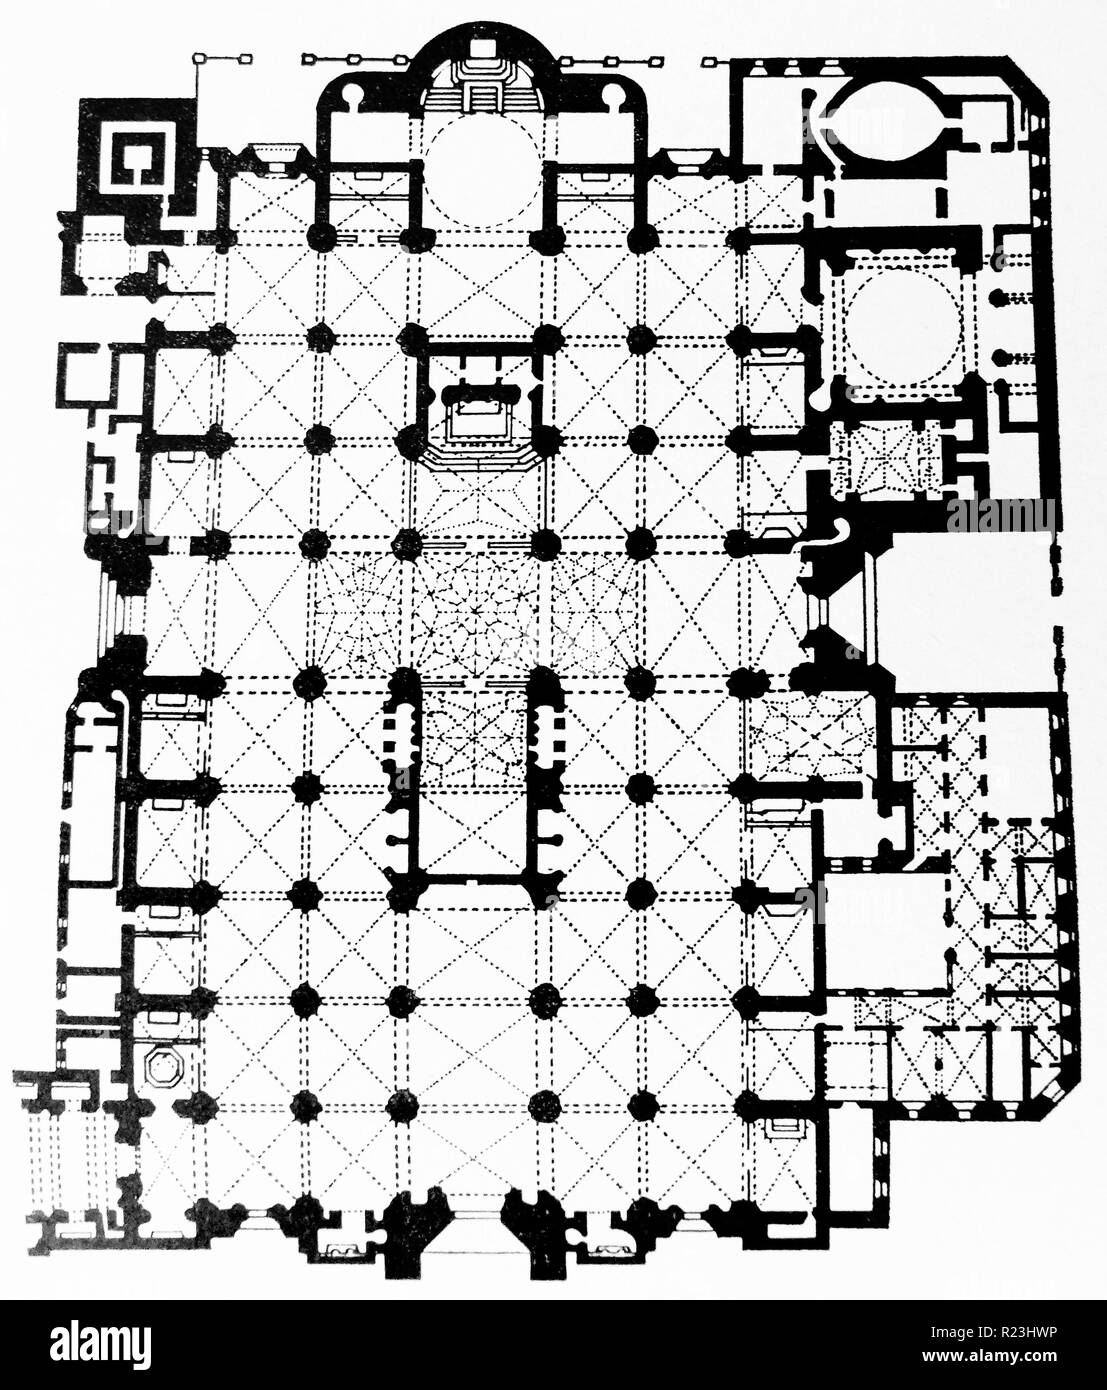 Cathedral Of Seville Floor Plan The Cathedral Of Saint Mary Of